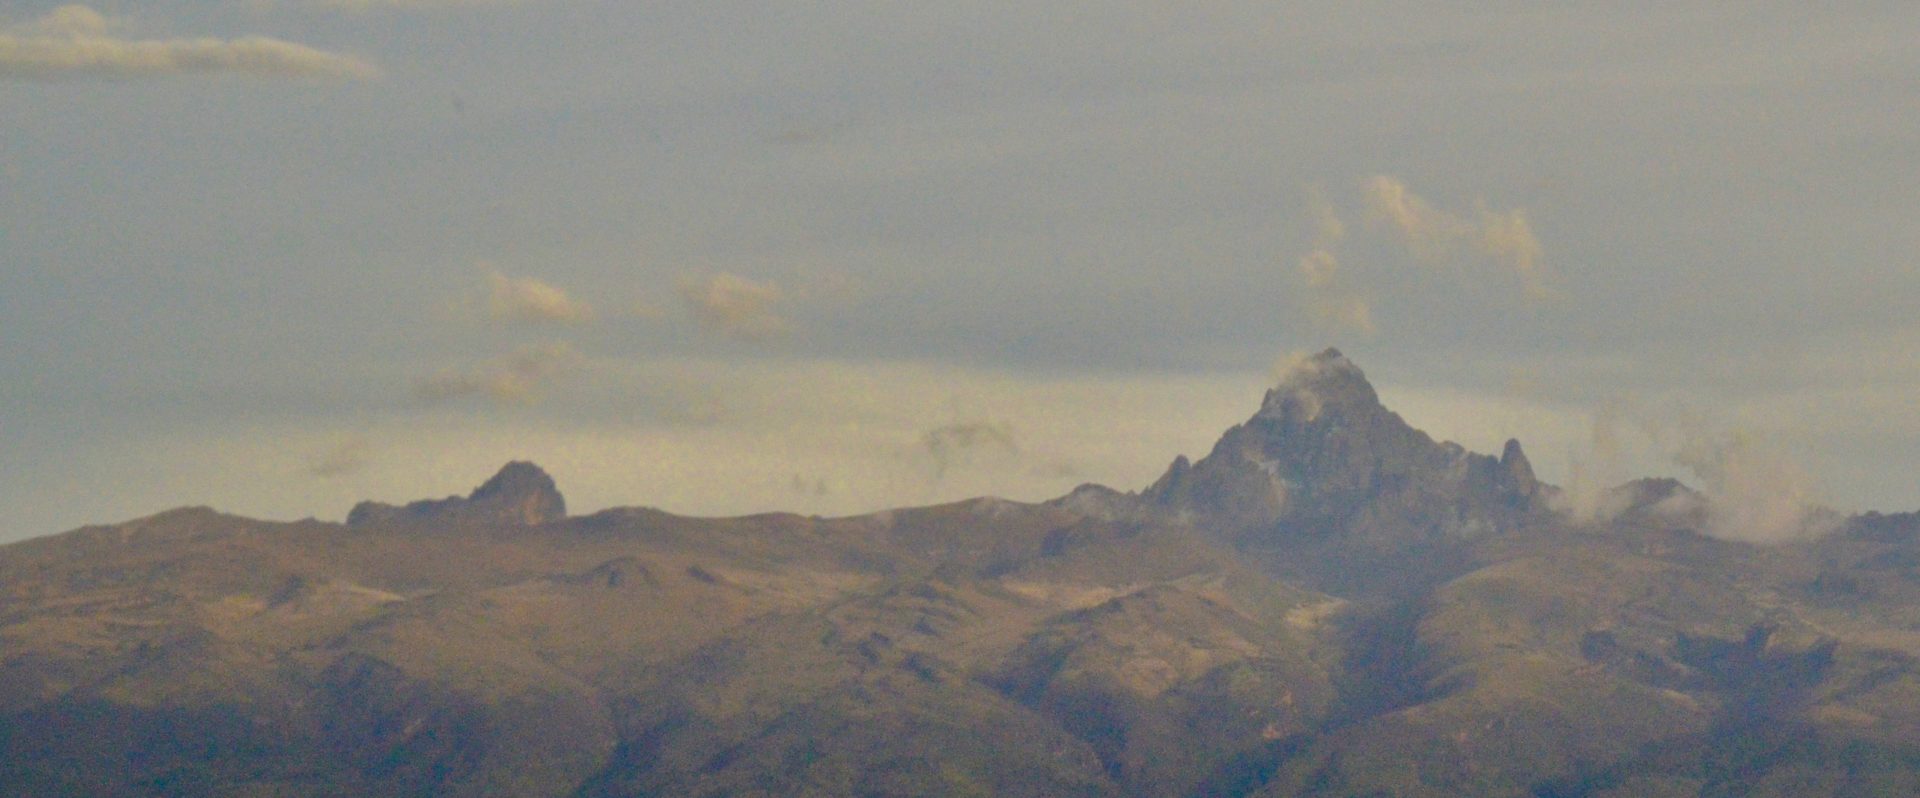 Mount Kenya from Sweetwaters 